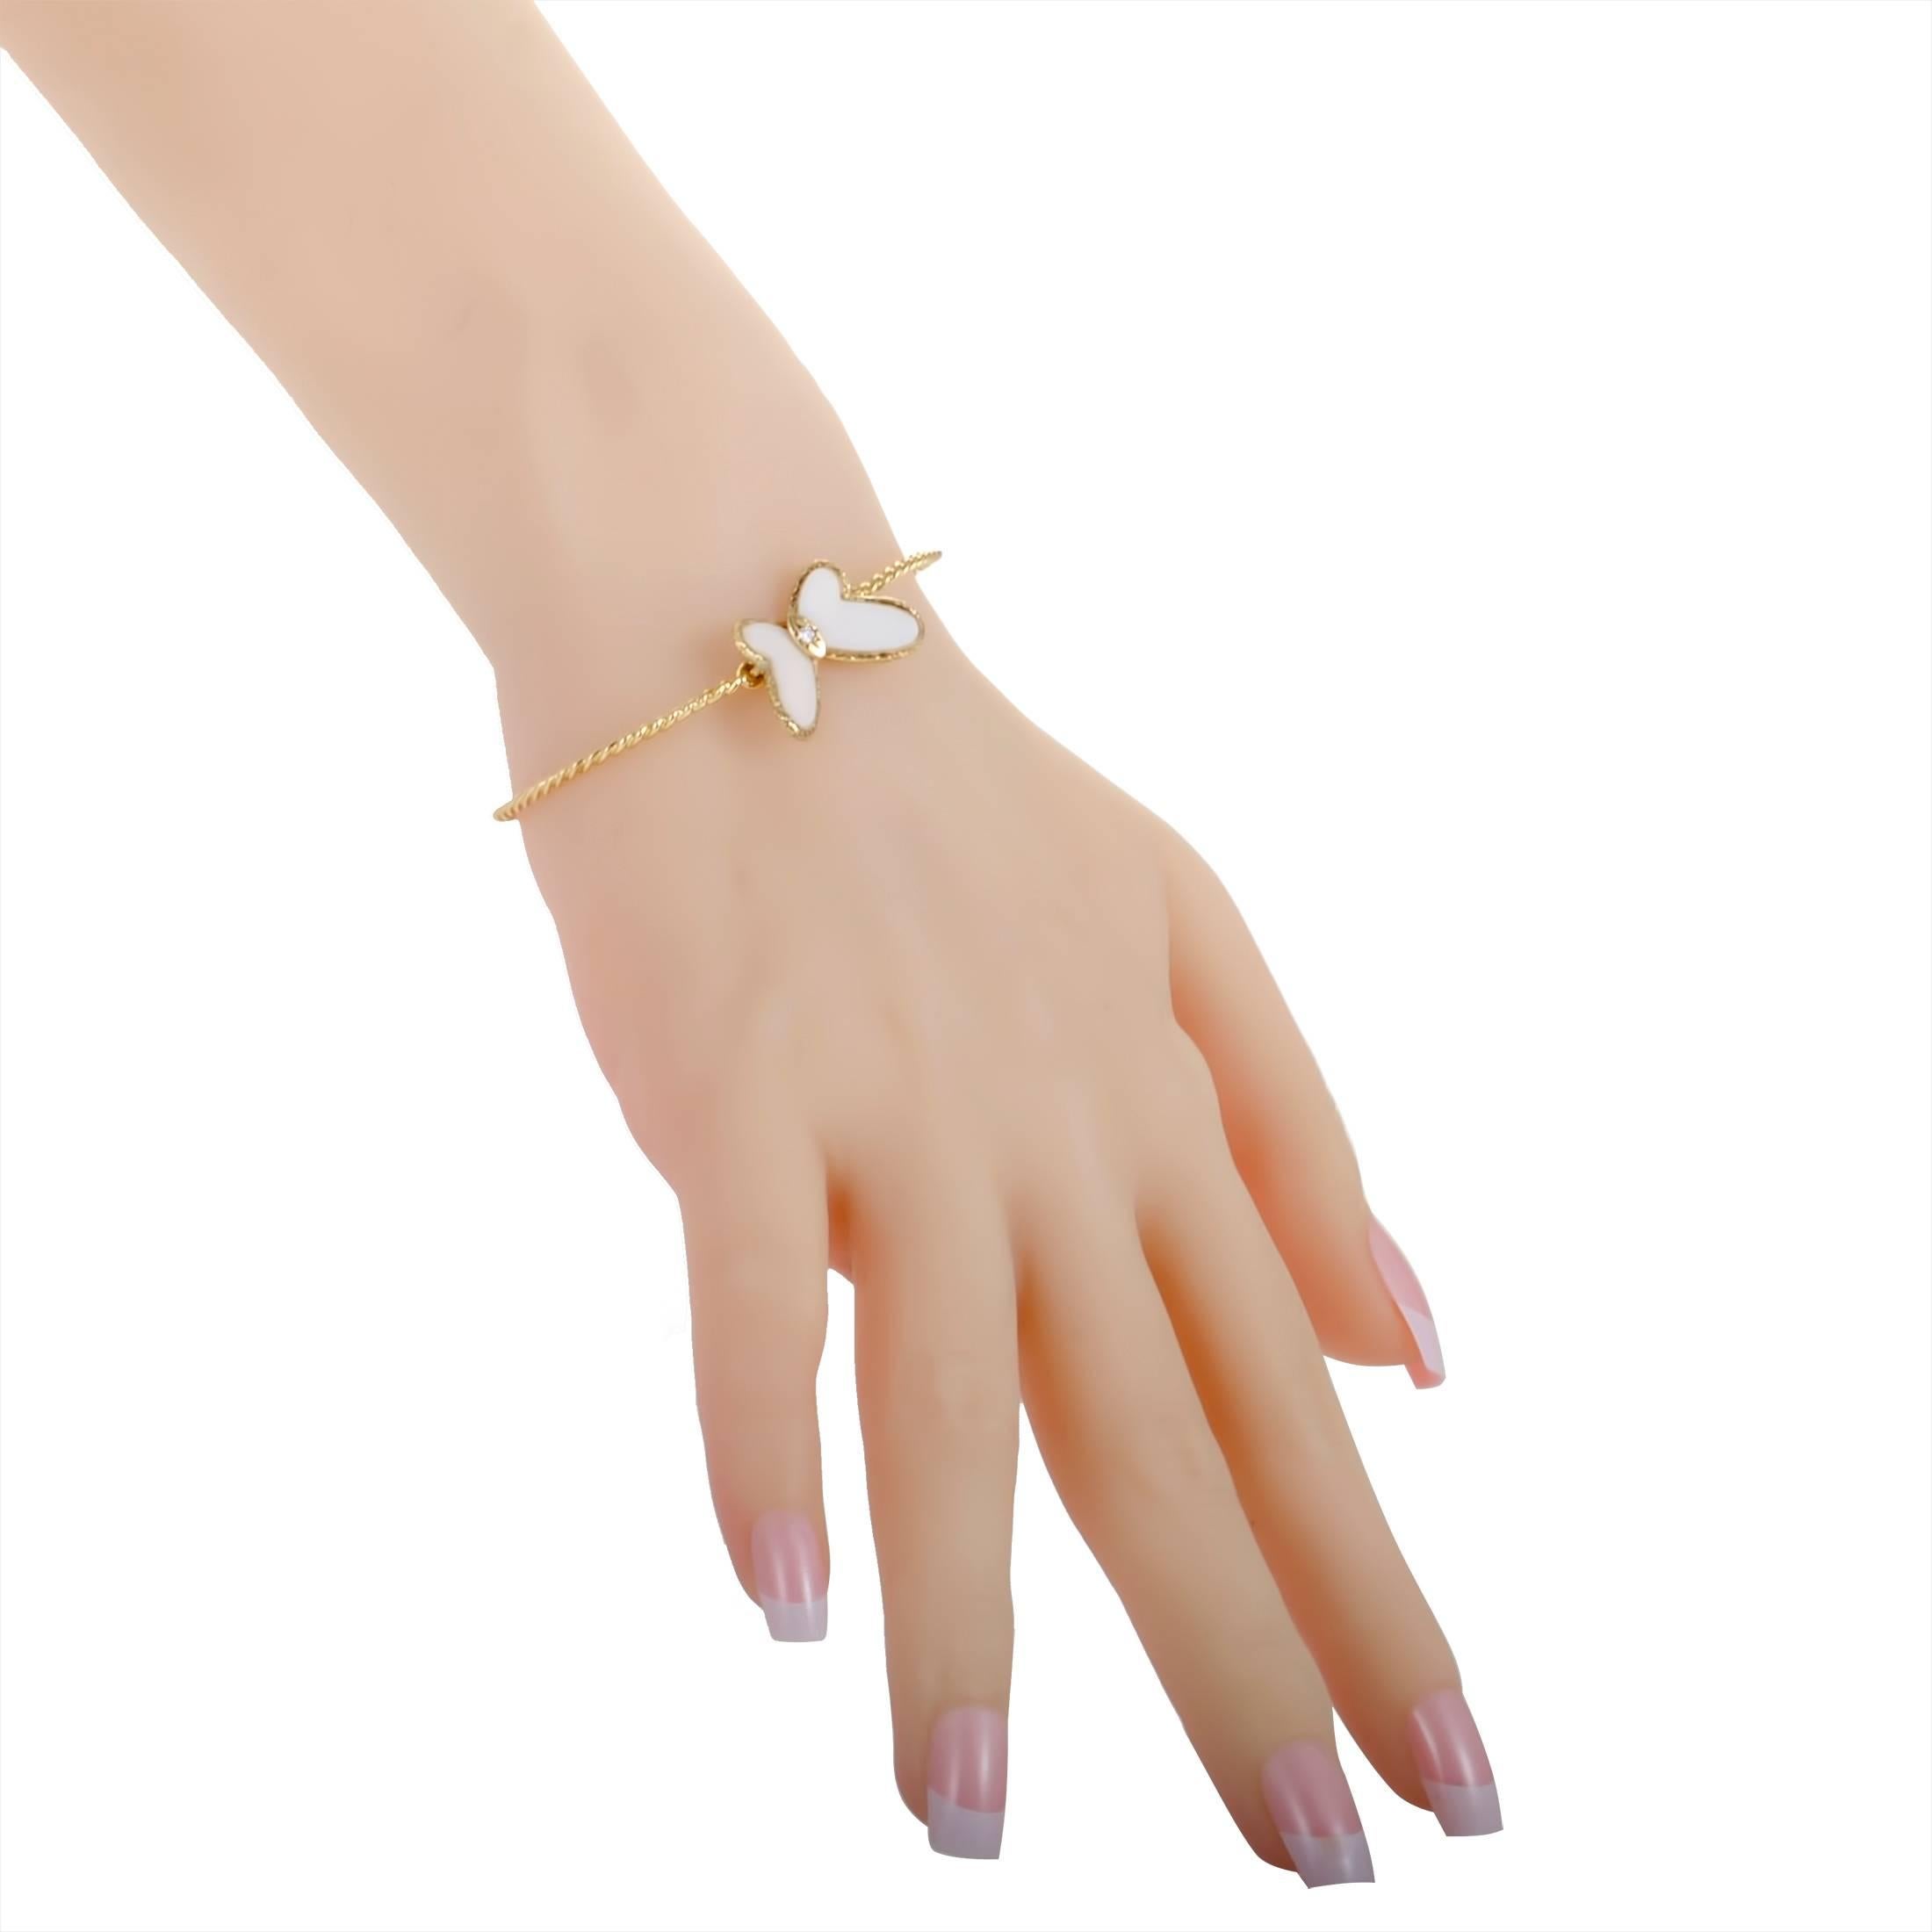 This stunning bracelet by Van Cleef & Arpels is bound to embellish any arm it is worn on! Beautifully designed in 18K yellow gold, the delicate bracelet has a butterfly accented with white coral wings and one sparkling diamond that enhances the